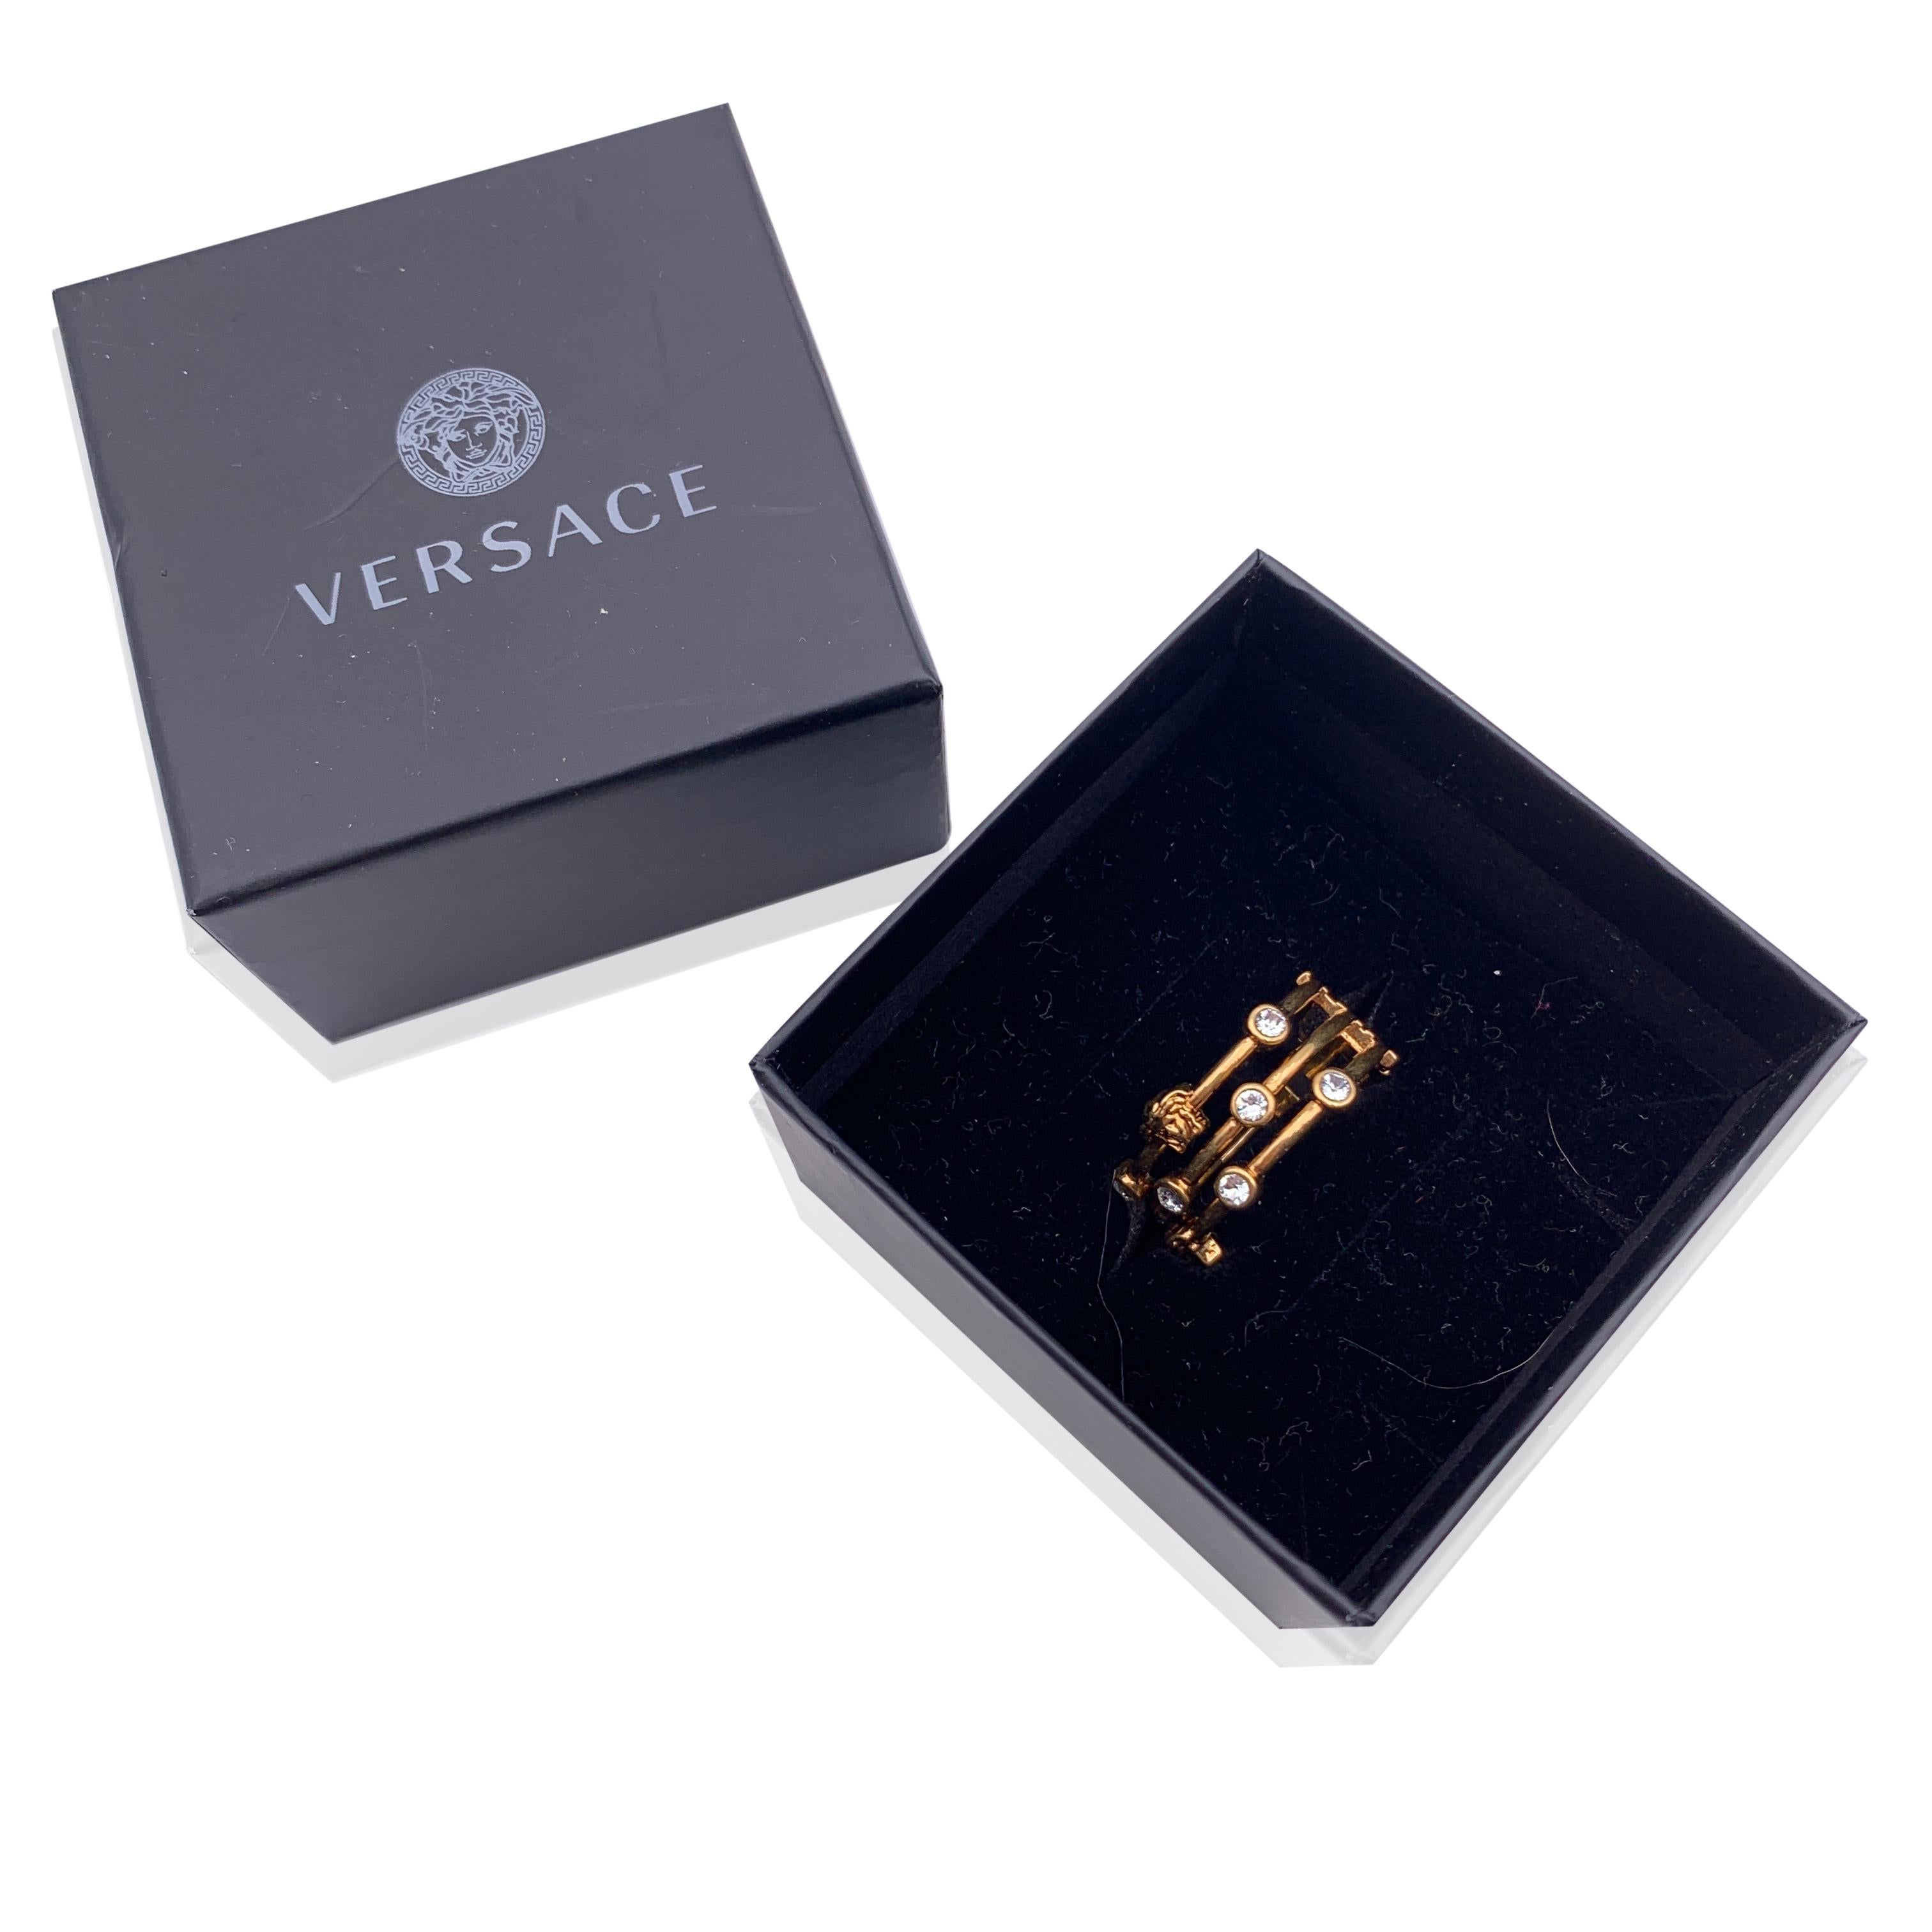 Beautiful Versace Medusa band ring. Crafted of gold metal, it features small white crystals and small medusa head. Size: 25 (US size 10.5). 'Versace - Made in Italy' engraved internally.


Condition

A+ - MINT

Never worn or used. Please, look